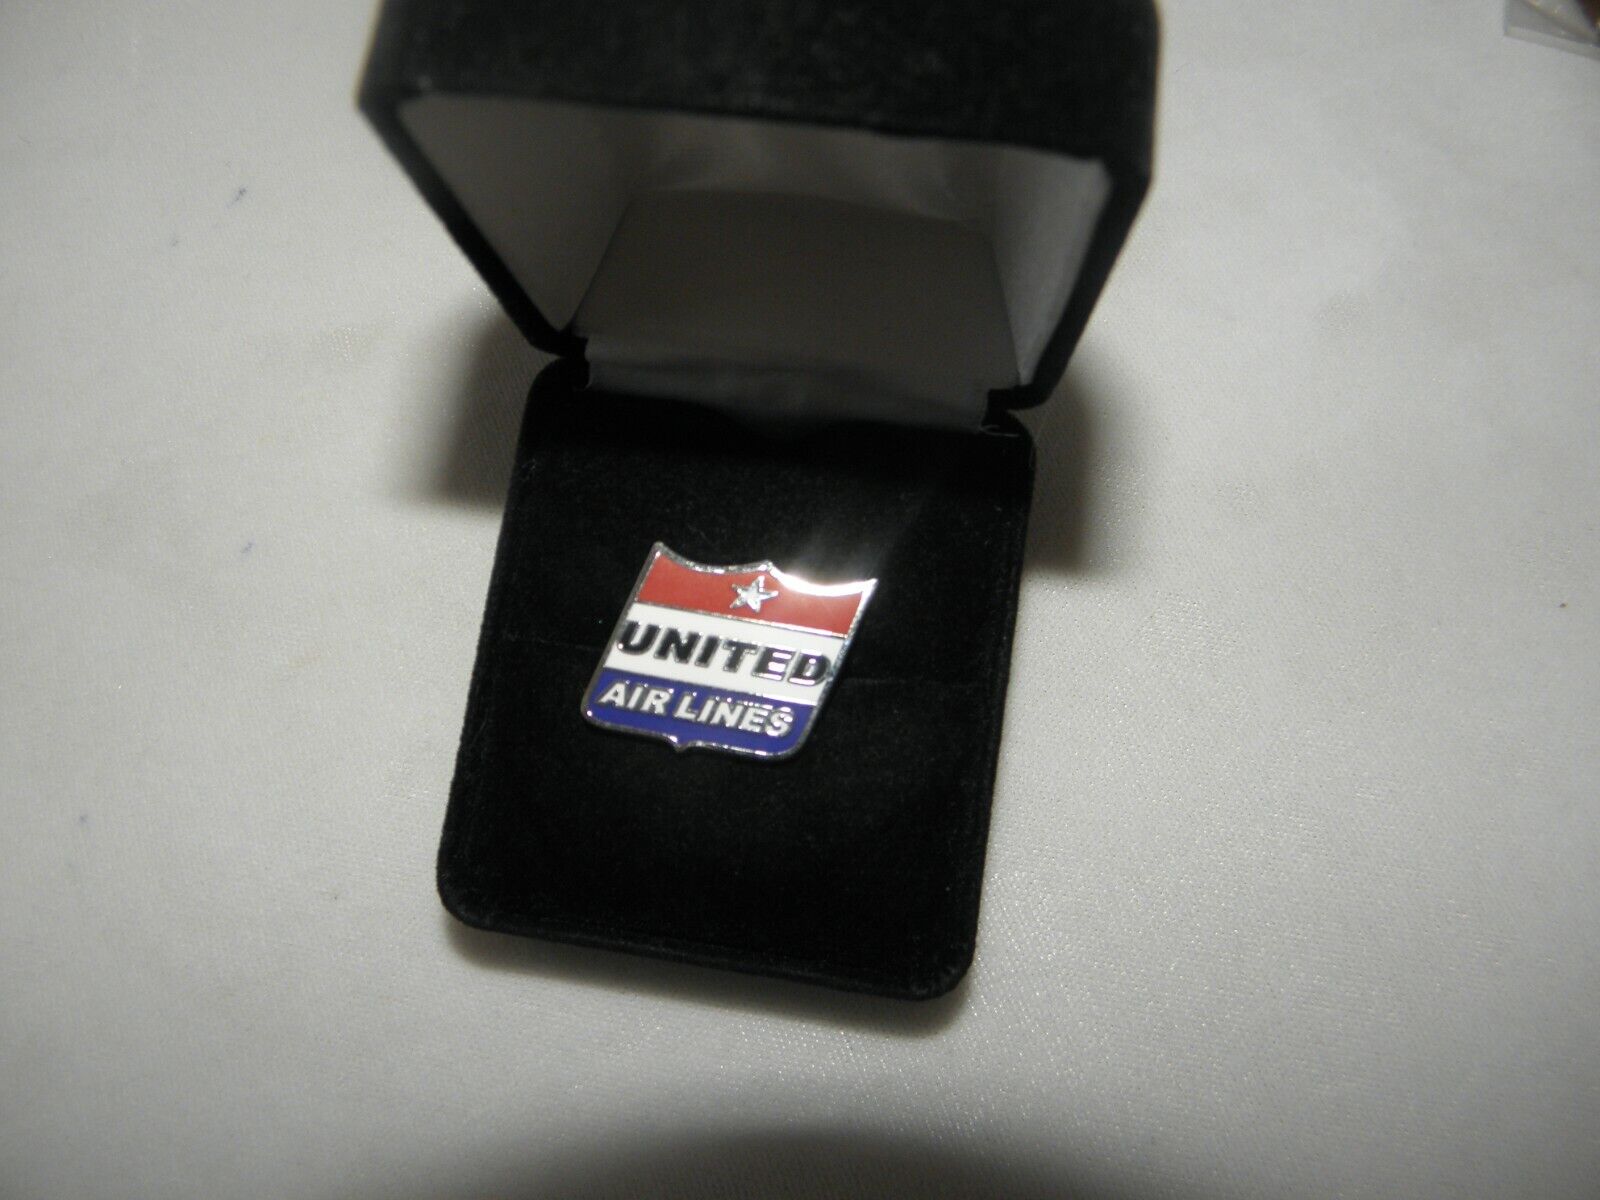 UNITED AIRLINES LAPEL PIN 1950s CLASSIC OLD LOGO AIRPLANE PILOT COLLECTIBLE GIFT